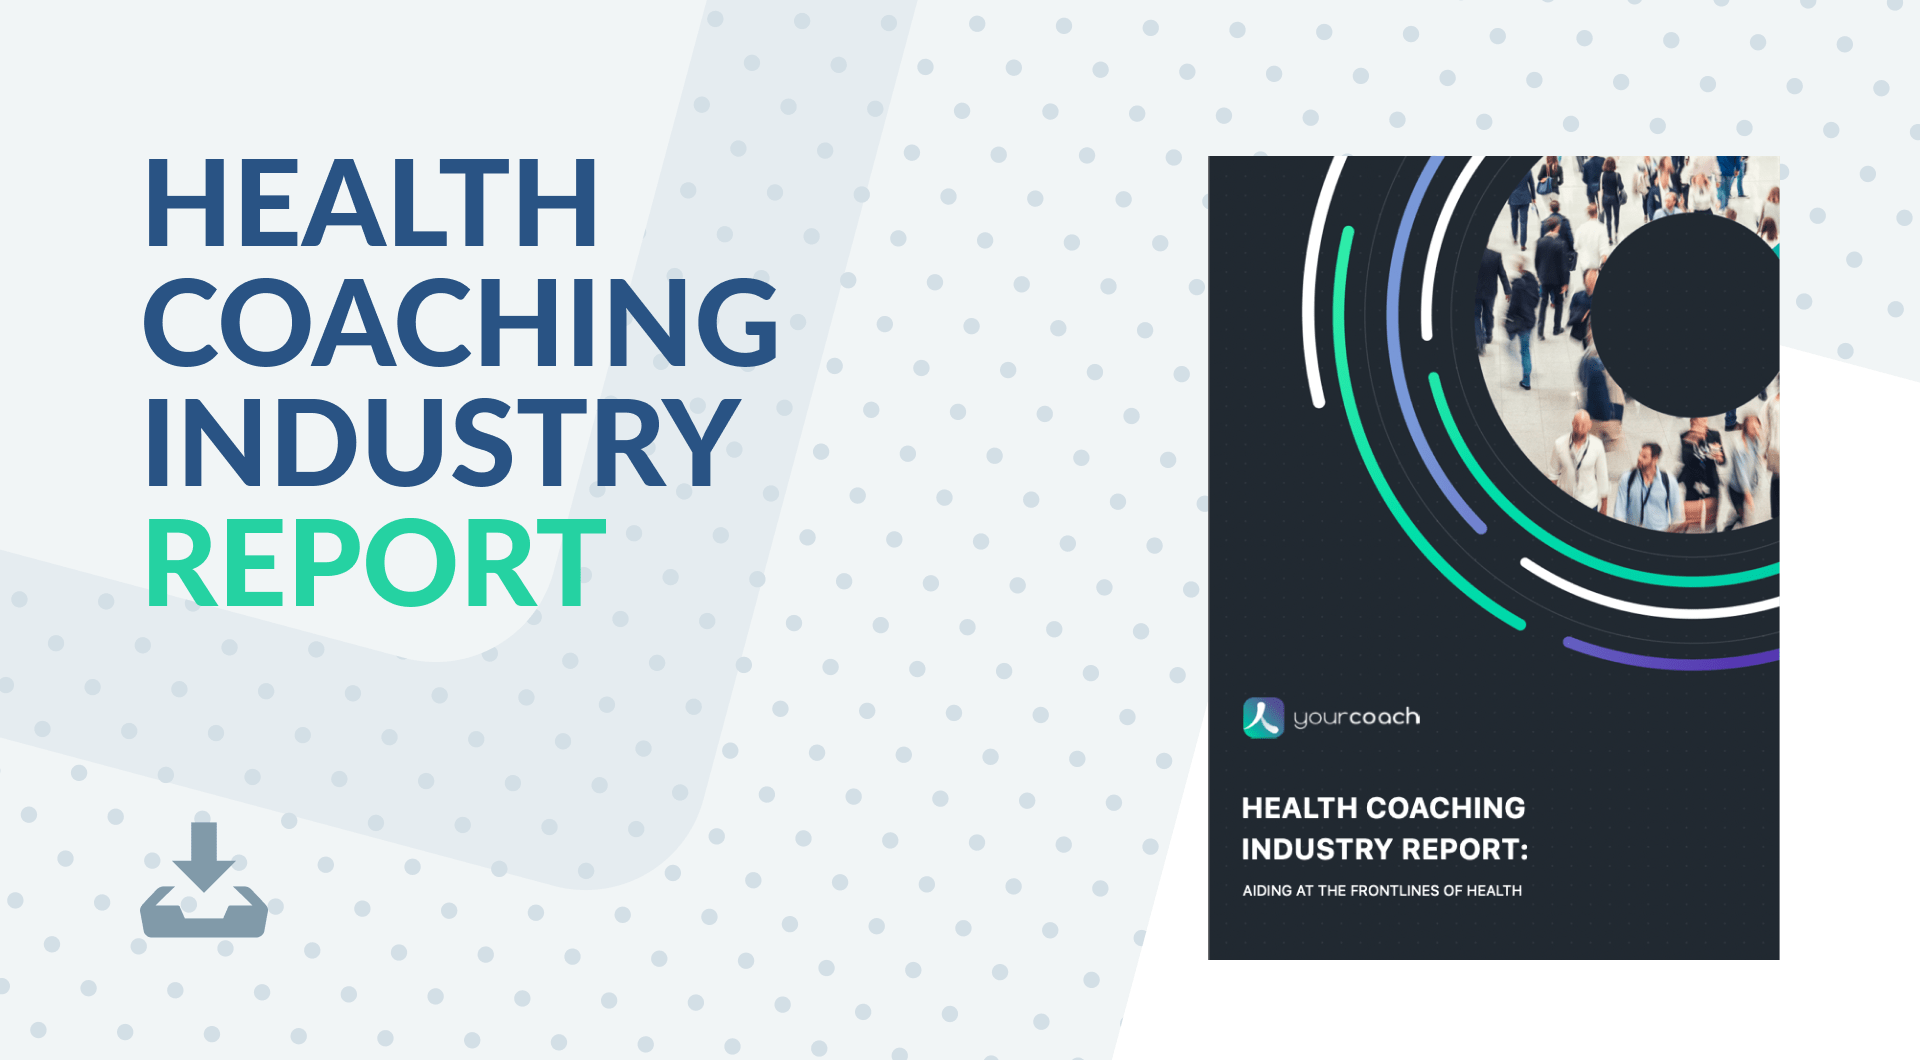 Health Coaching Industry Report: Aiding At The Frontlines Of Health